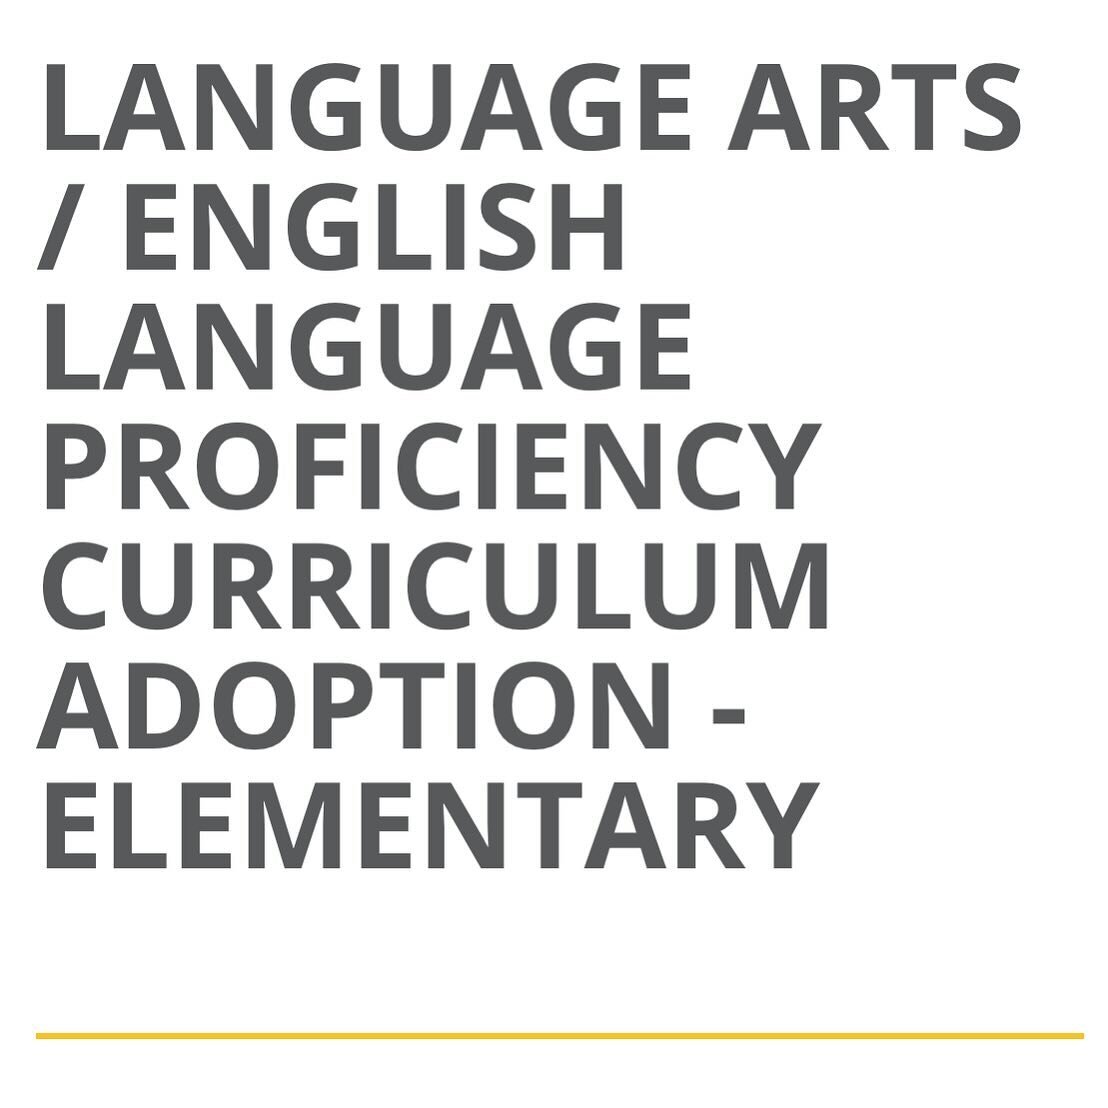 Our district is in the process of changing our Language Arts Curriculum. 2 curriculums have been selected and are being piloted. This is a big shift and investment, and now is your opportunity for input!

Raleigh Park parent Karen McCallum has been o